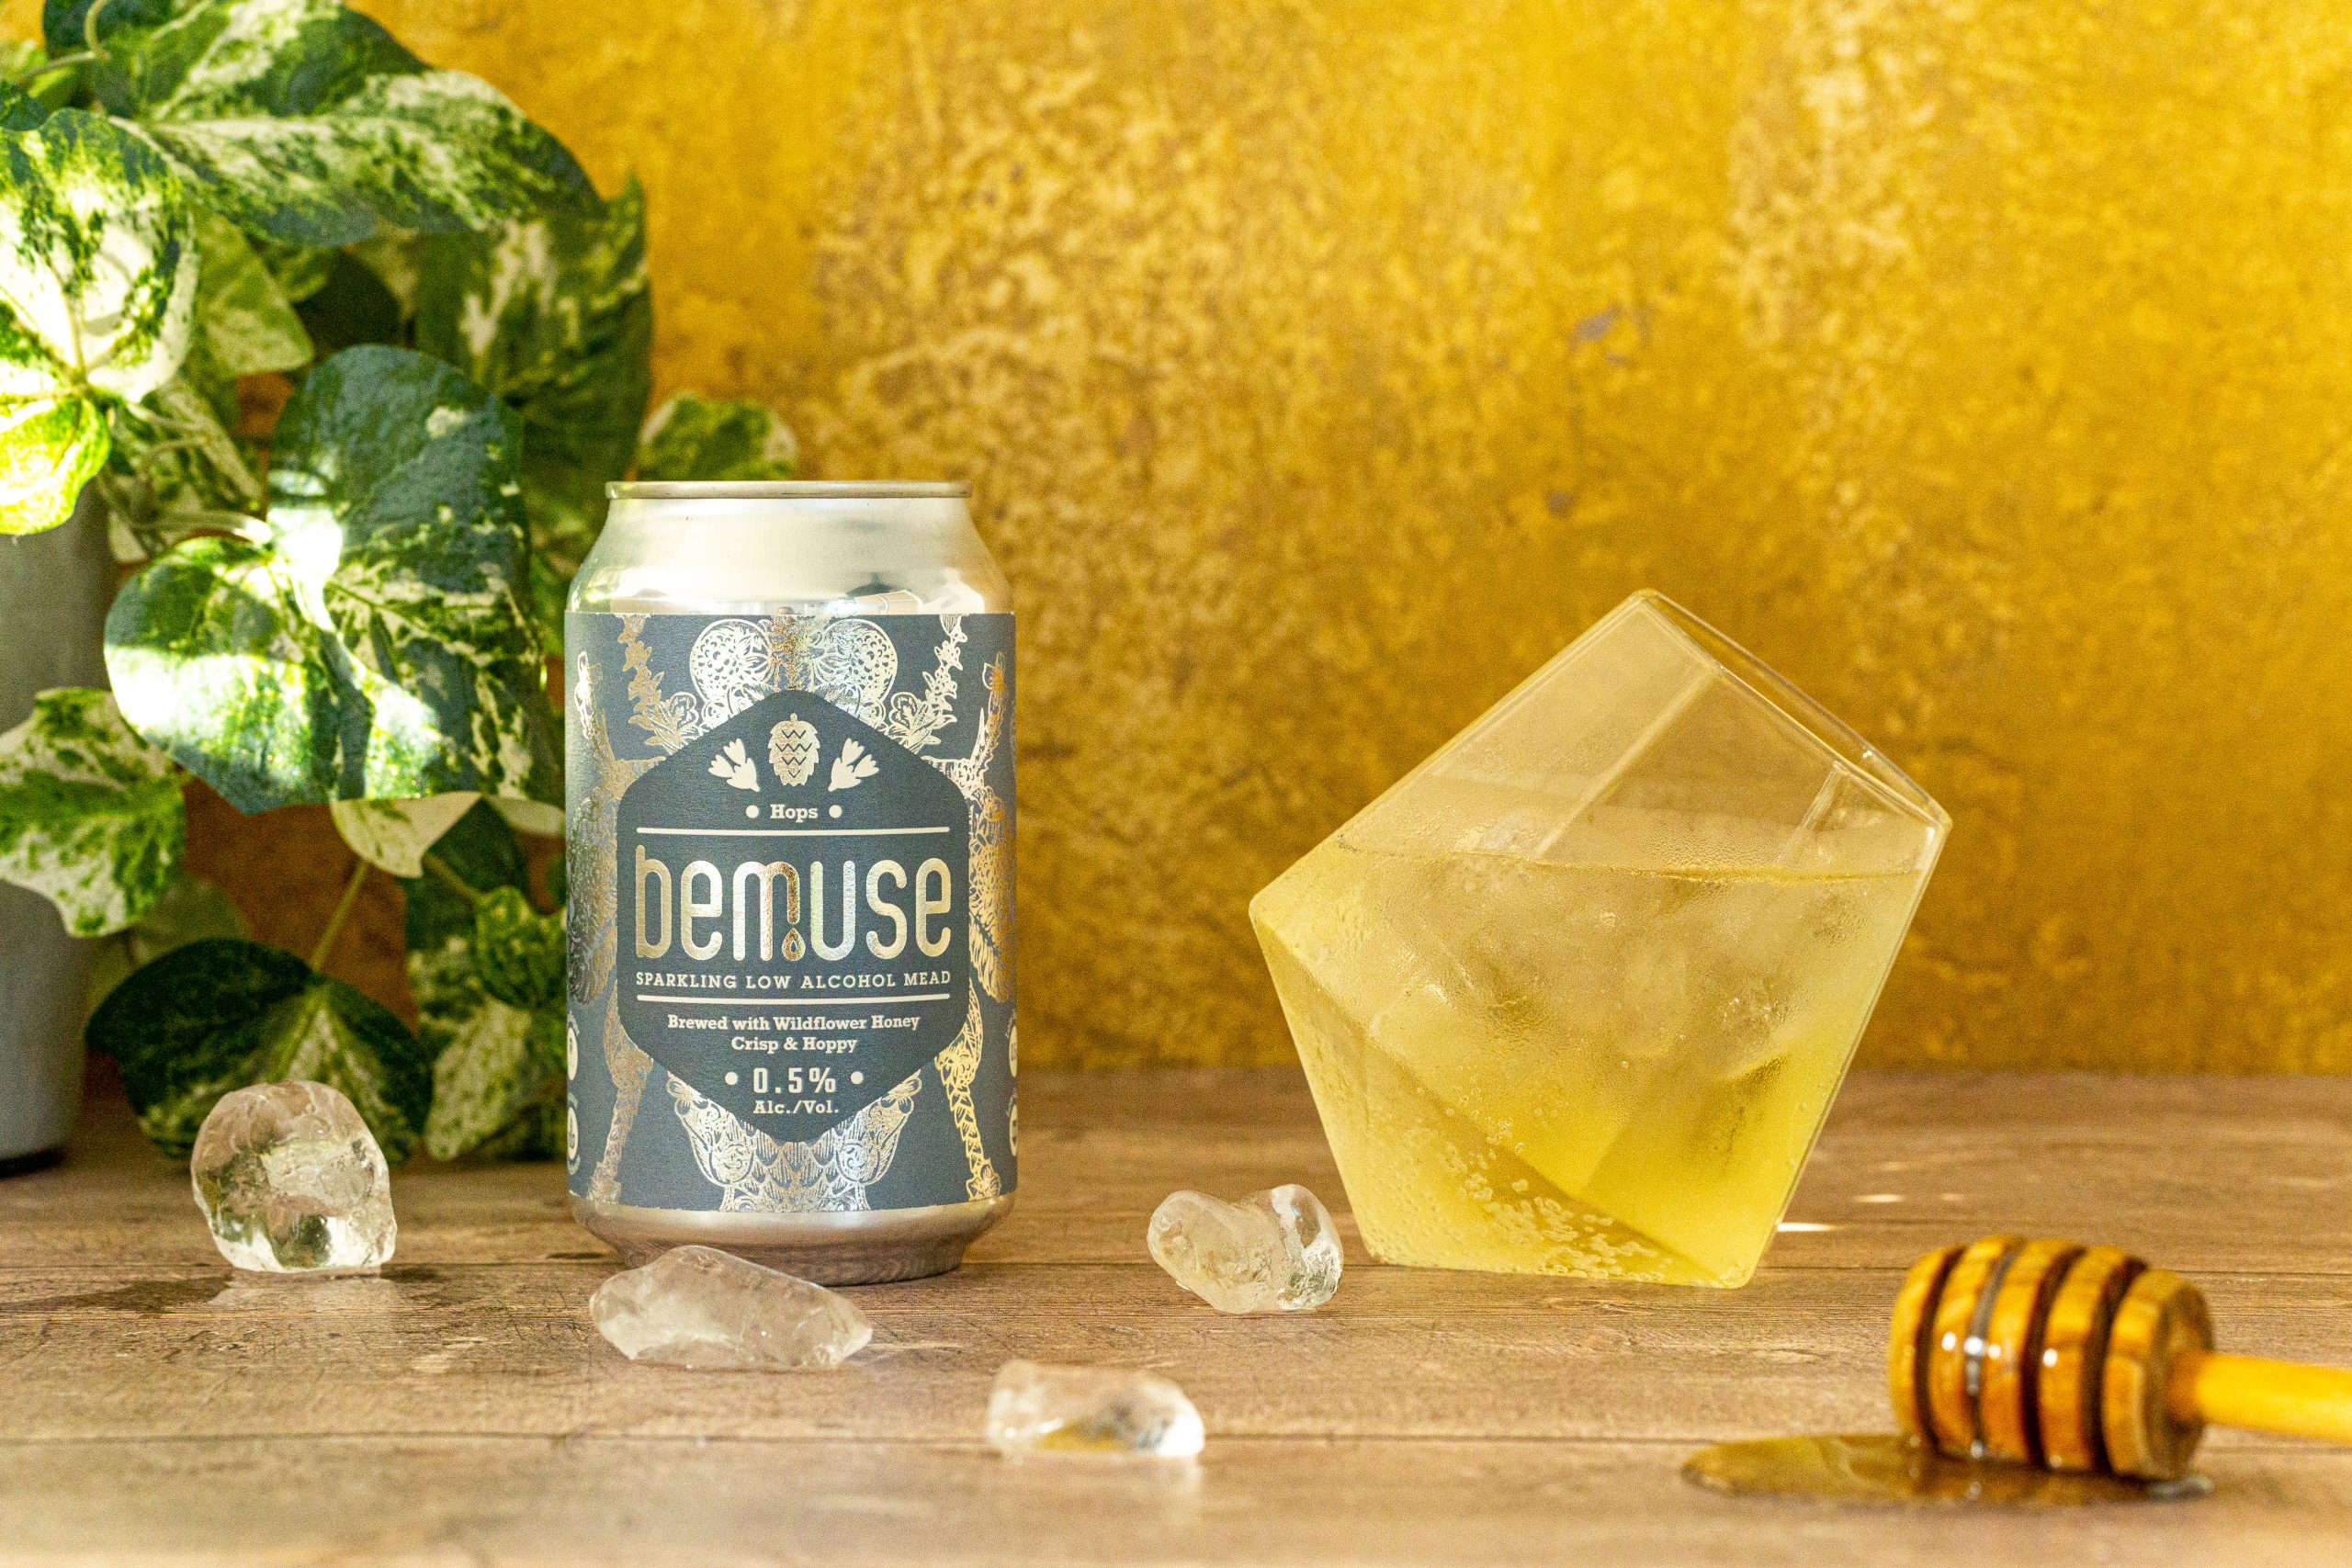 Bemuse low-alcohol craft mead wins at World Beverage Awards